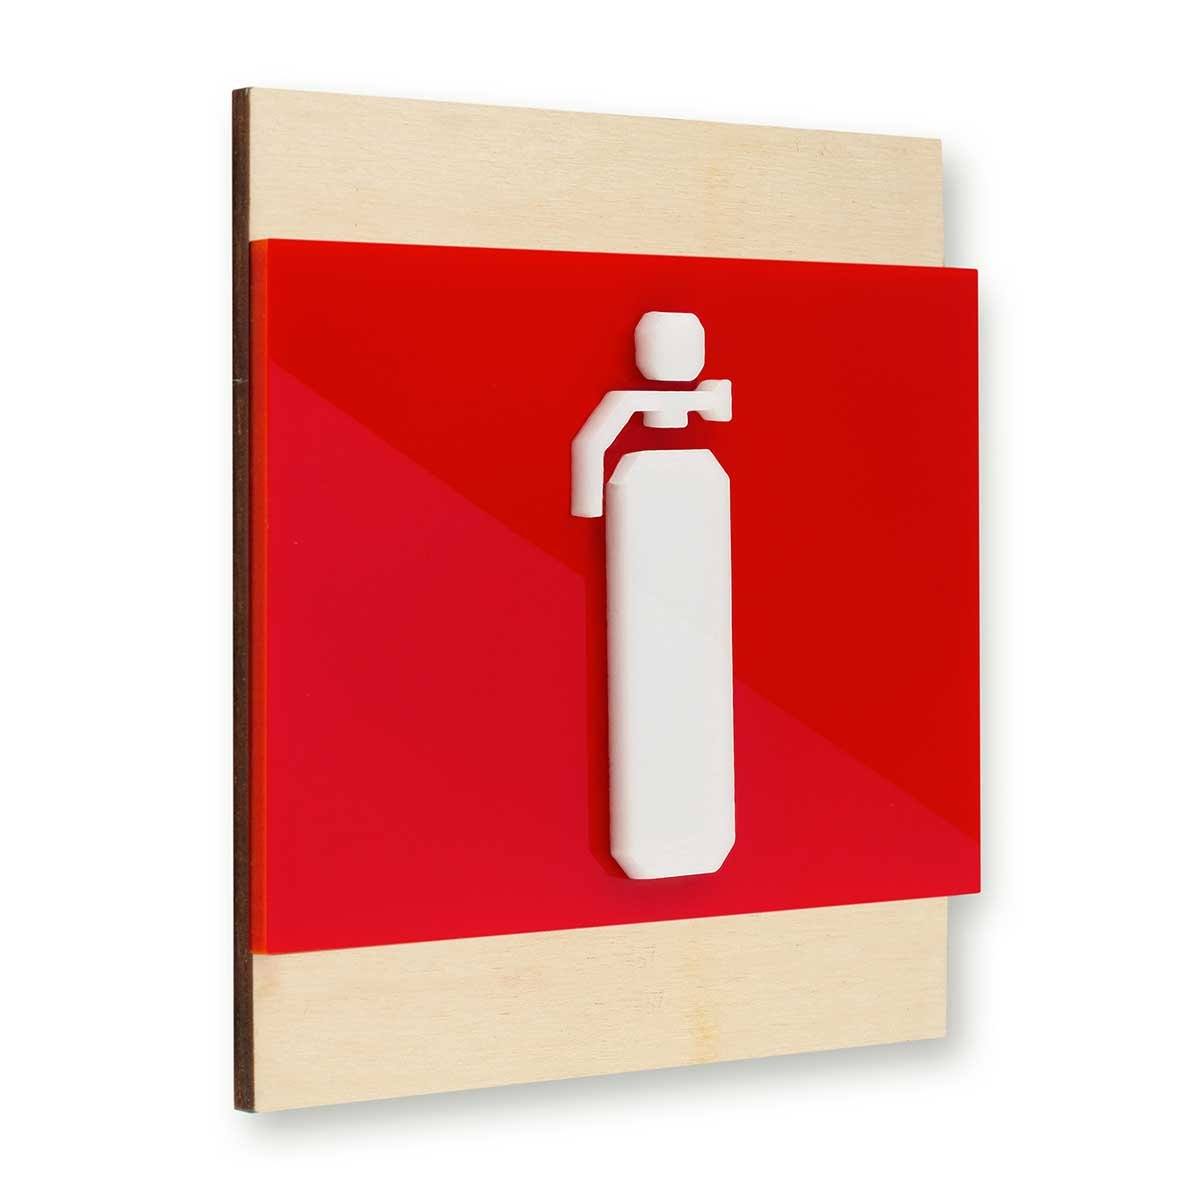  Extinguisher Fire Safety Wooden Wall Sign Information signs Natural wood Bsign